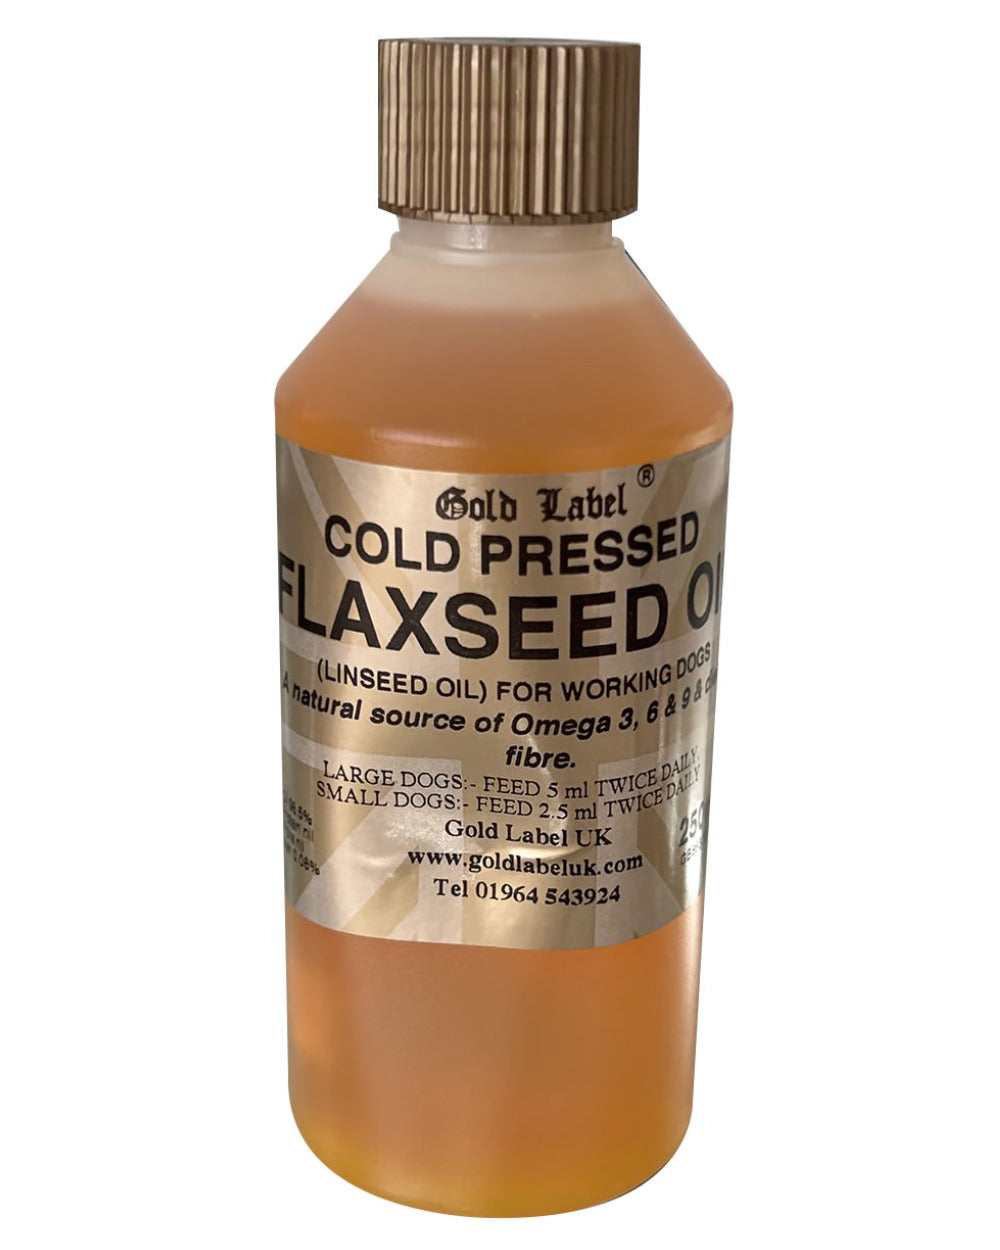 Gold Label Canine Flaxseed Oil On A White Background